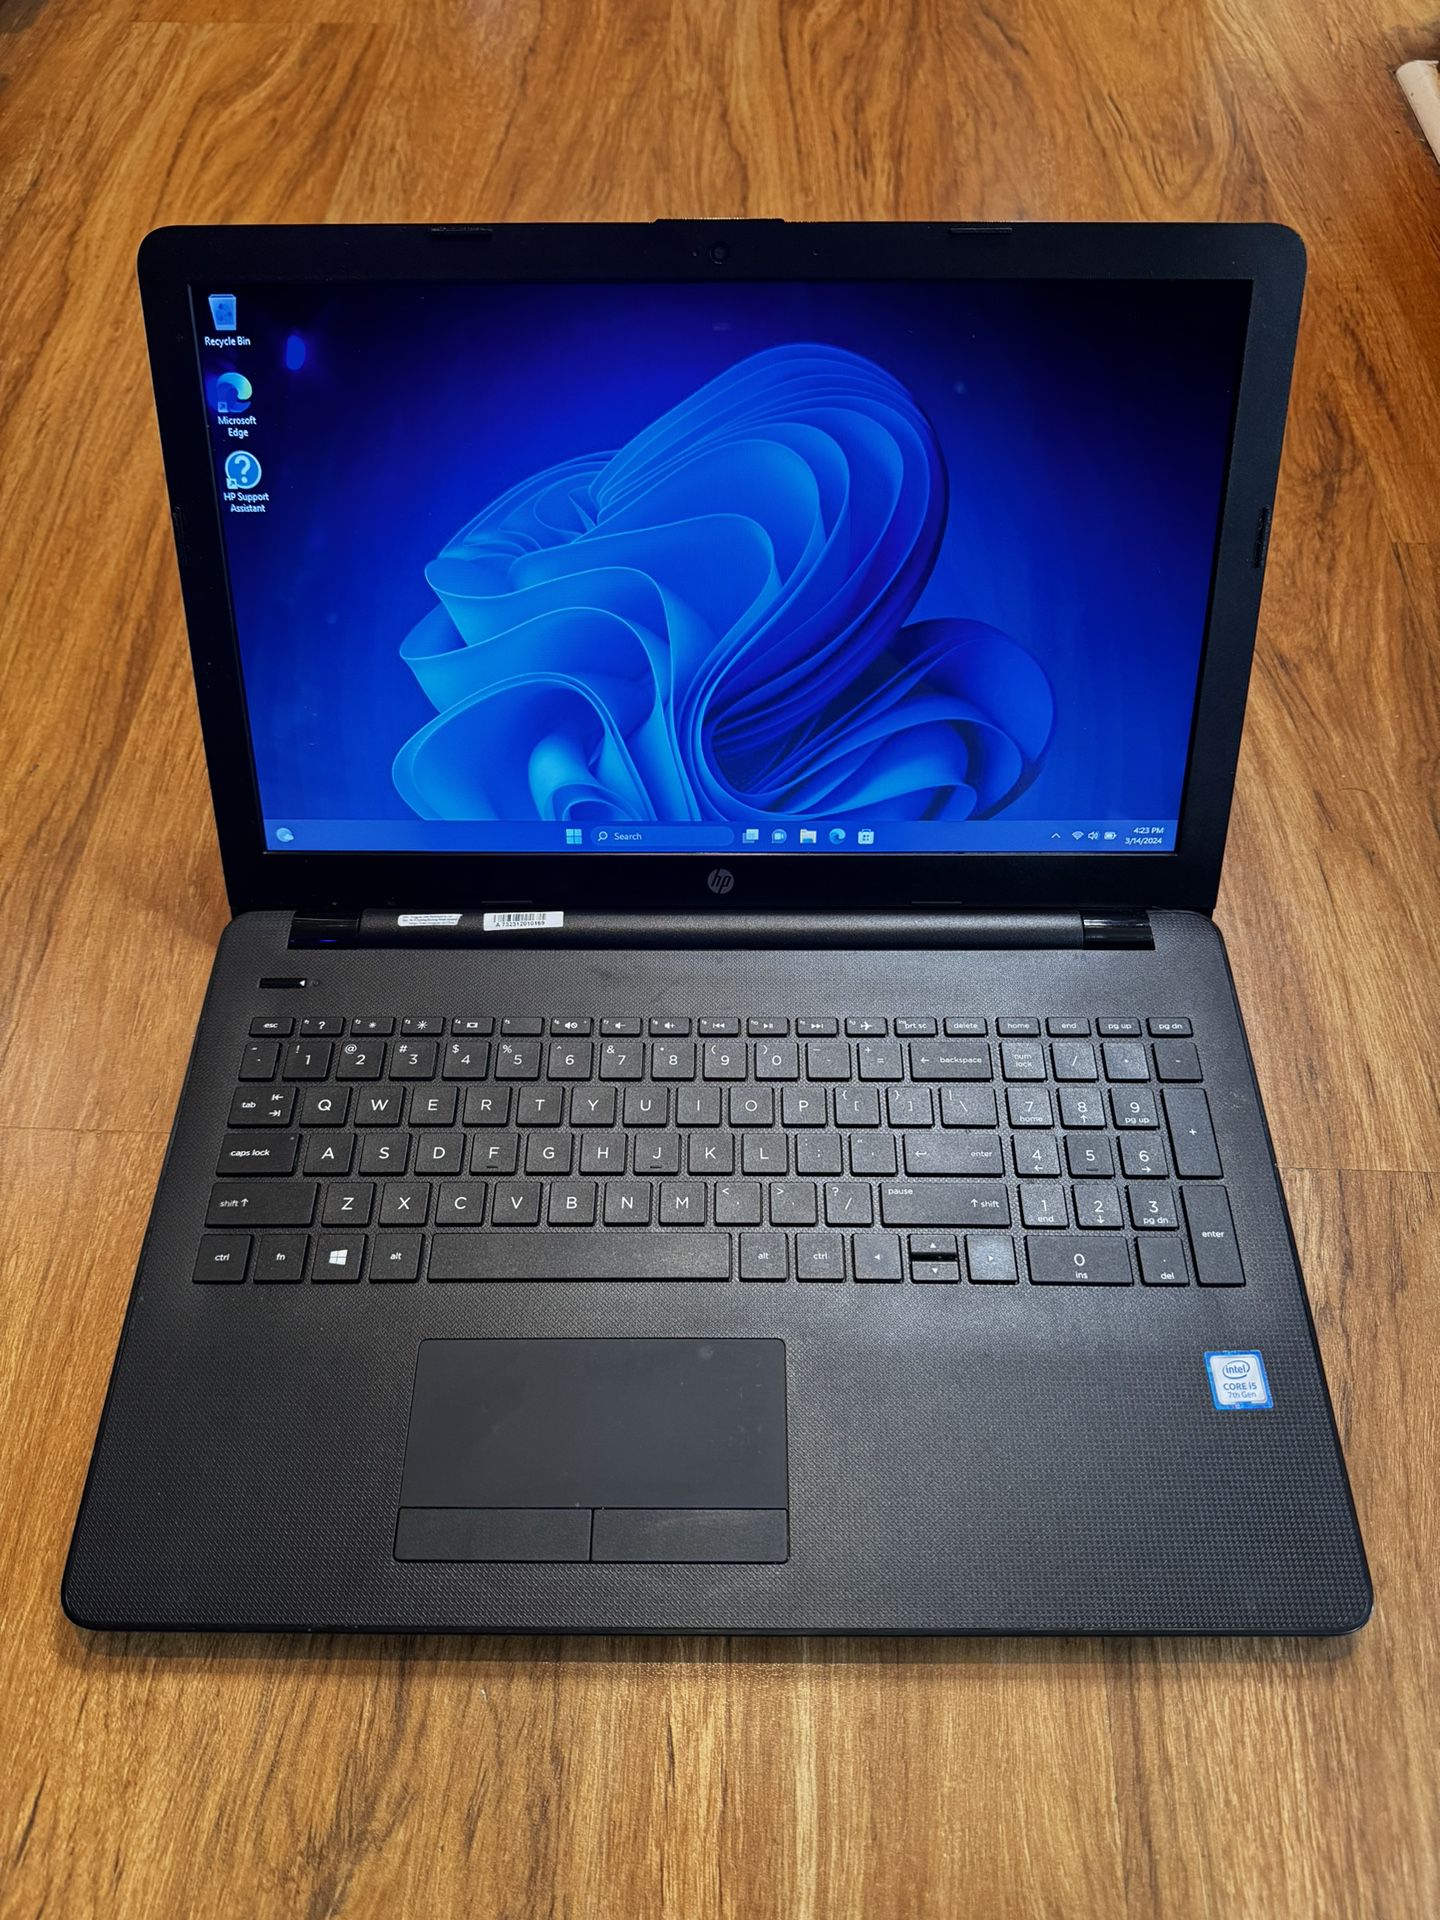 HP 15 NoteBook core i5 7th gen 8GB Ram 256GB SSD Windows 11 Pro 15.6” Touch Screen Laptop with charger in Excellent Working condition!!!!!  Specificat